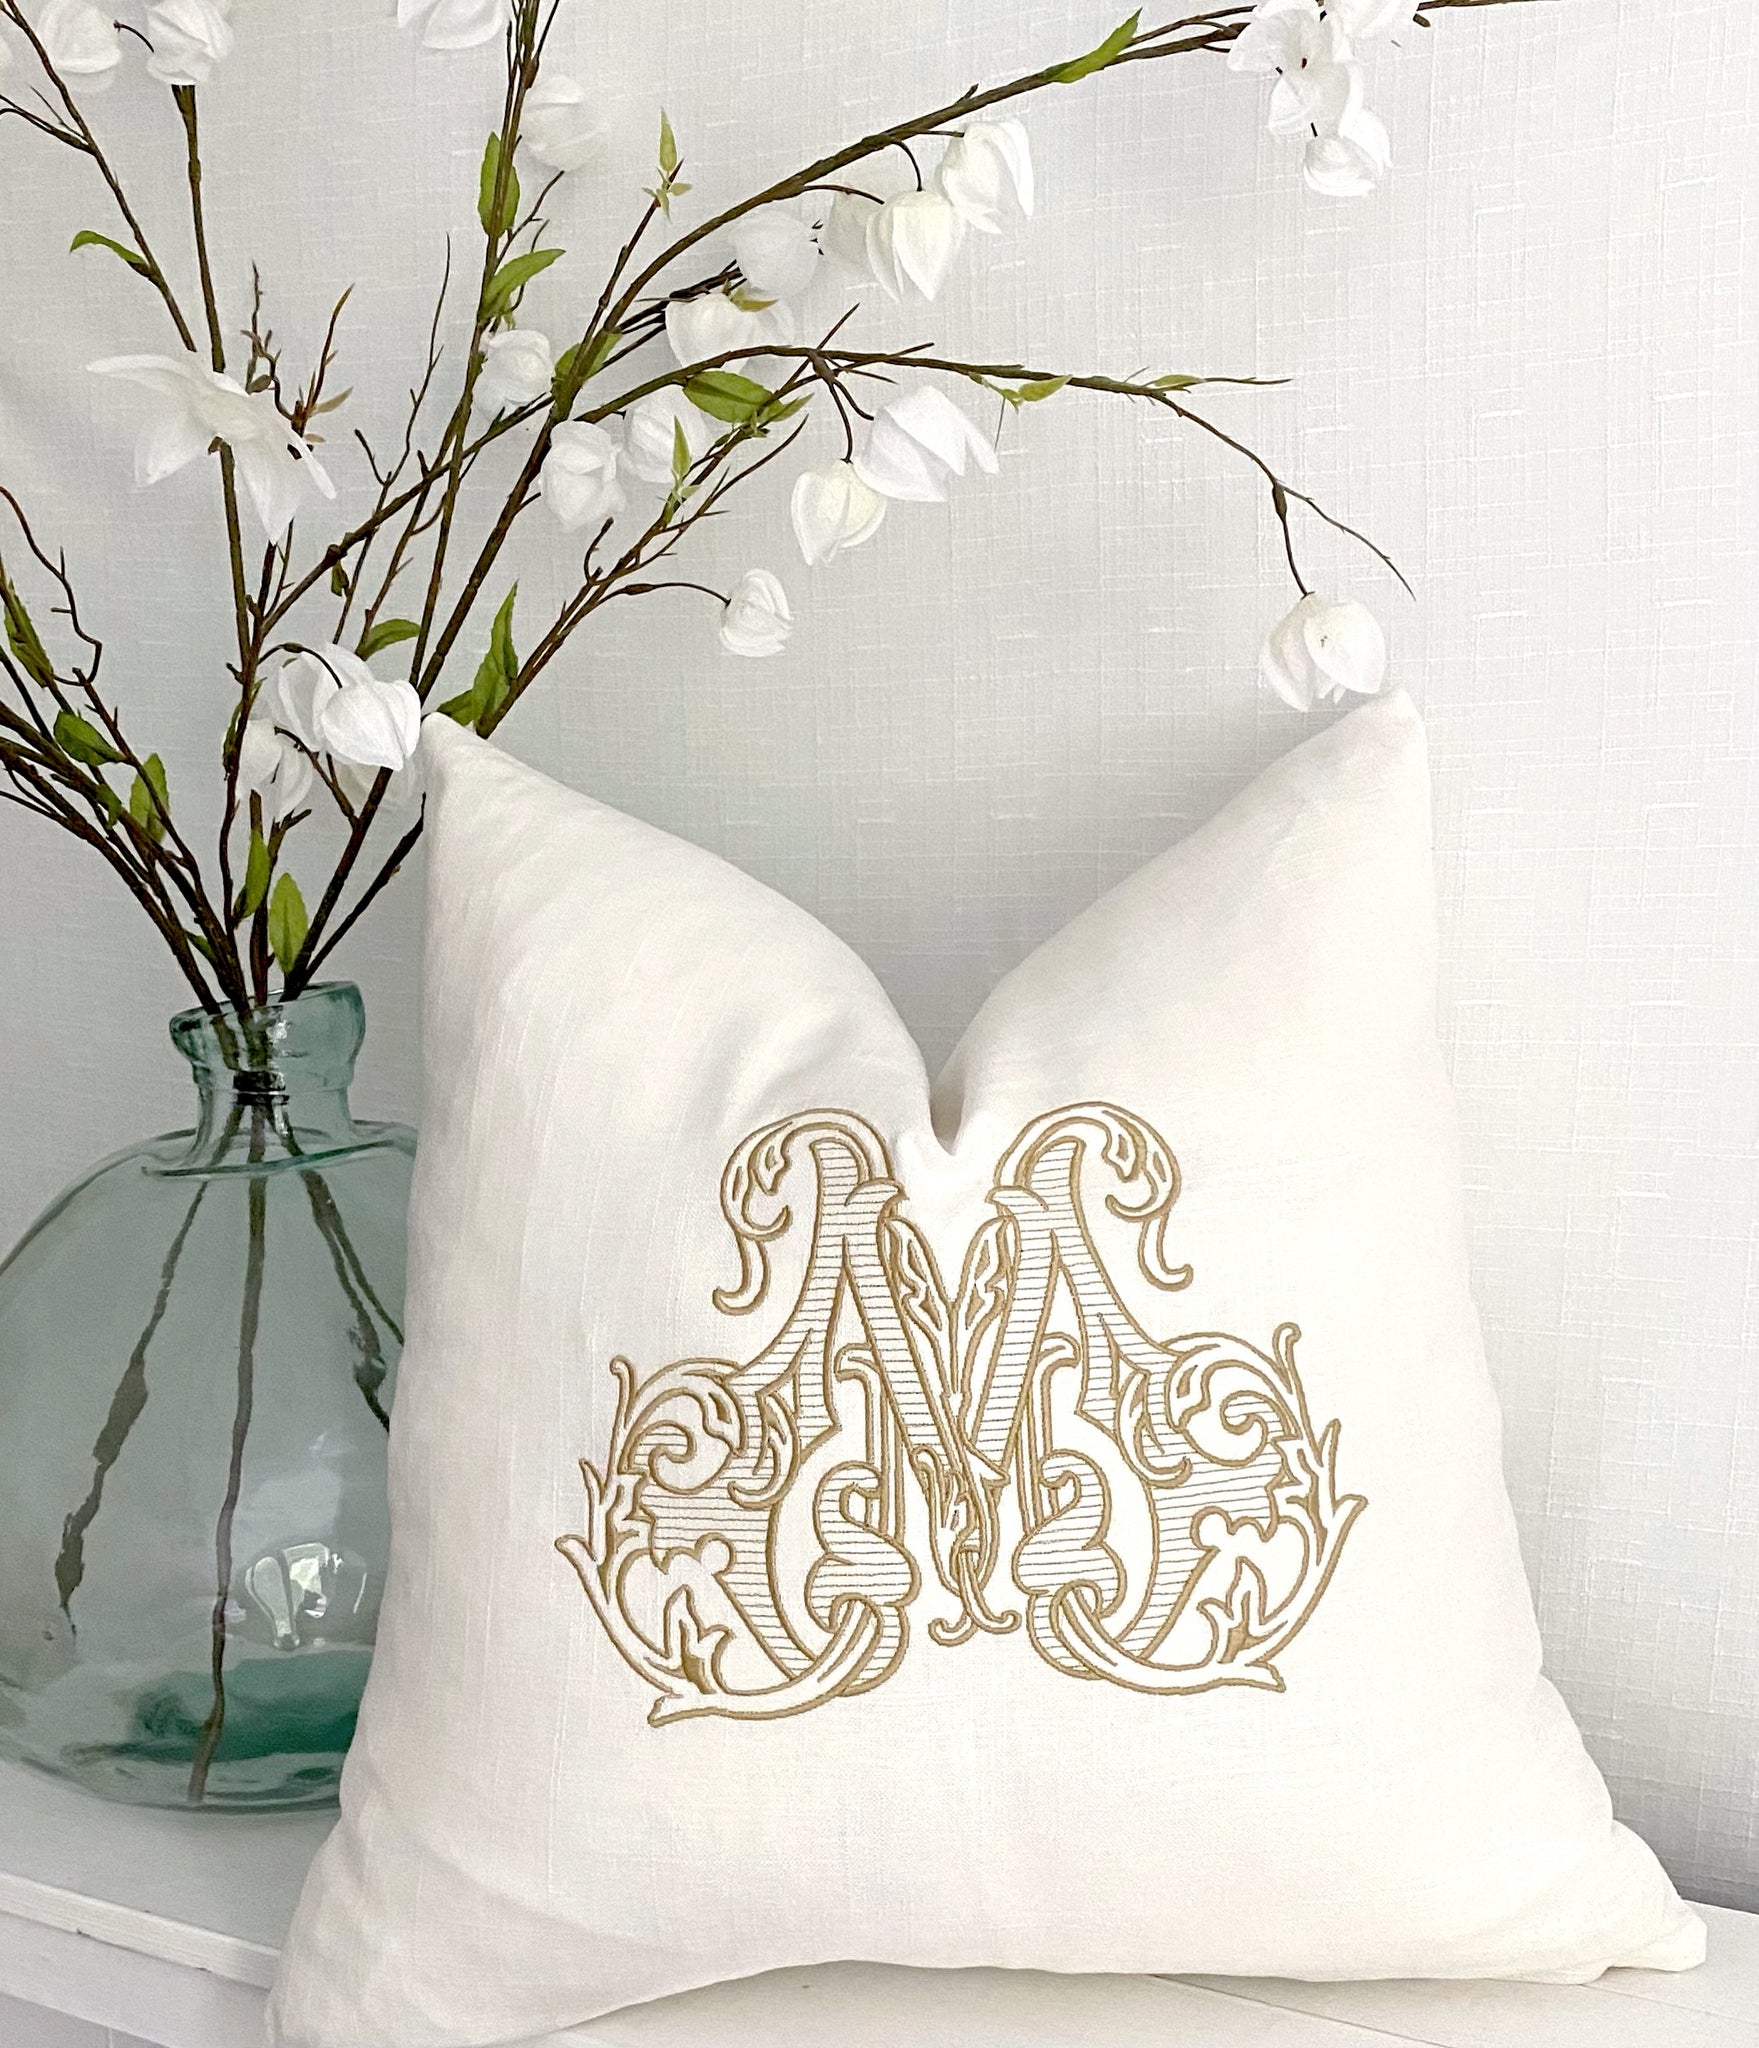 Sydney White- Embroidered Pillow